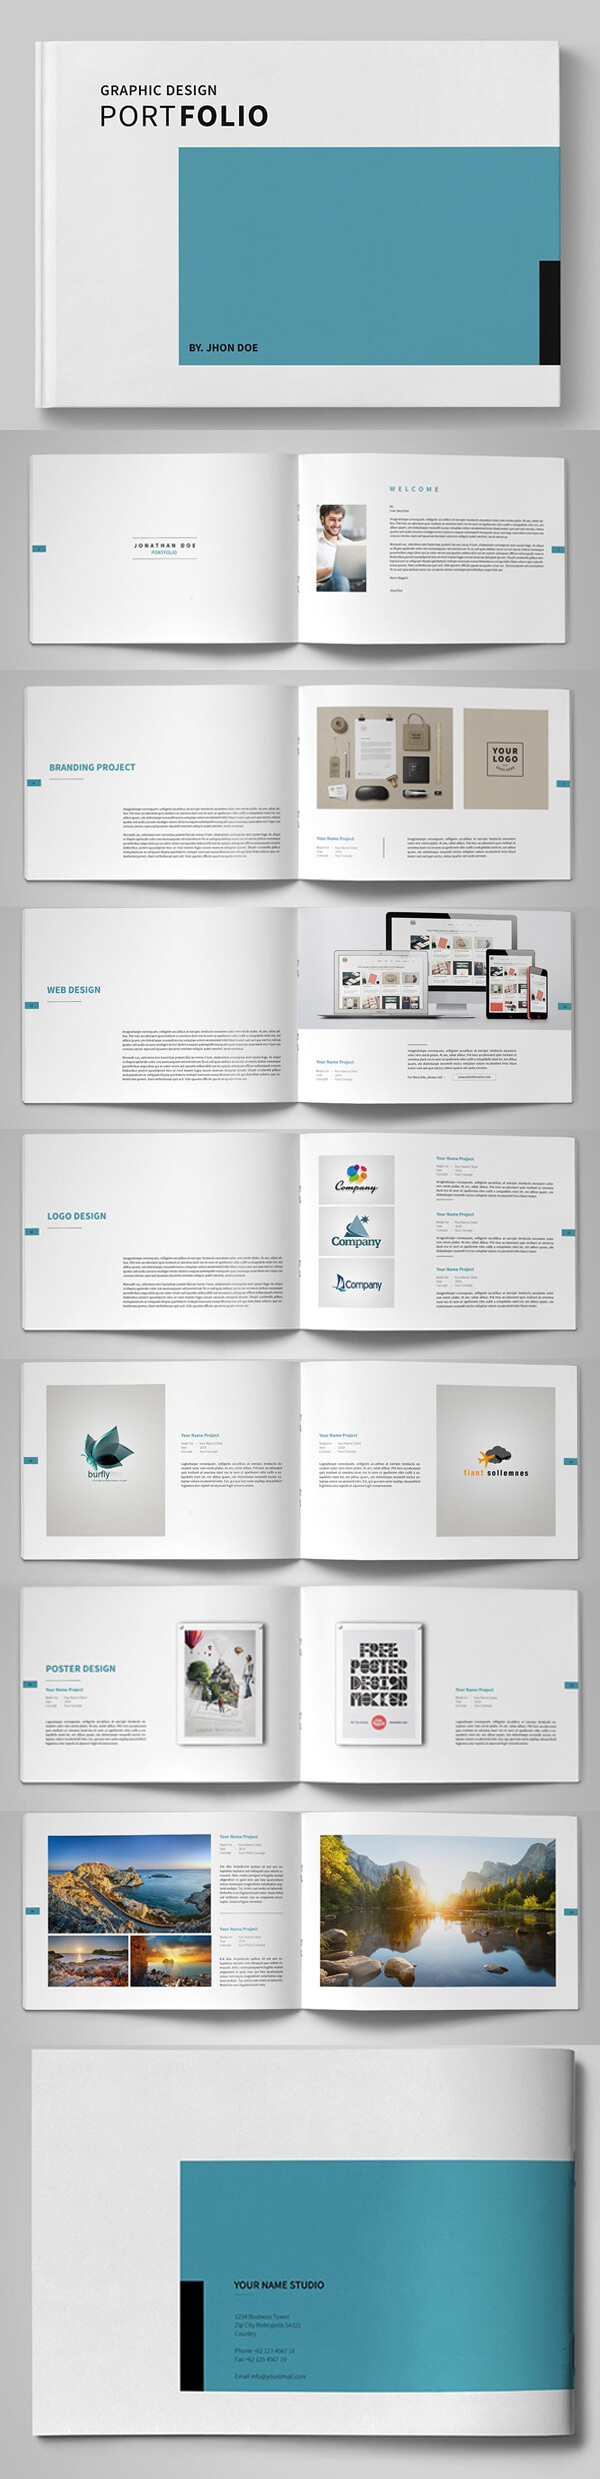 20 New Professional Catalog Brochure Templates | Design For Product Brochure Template Free